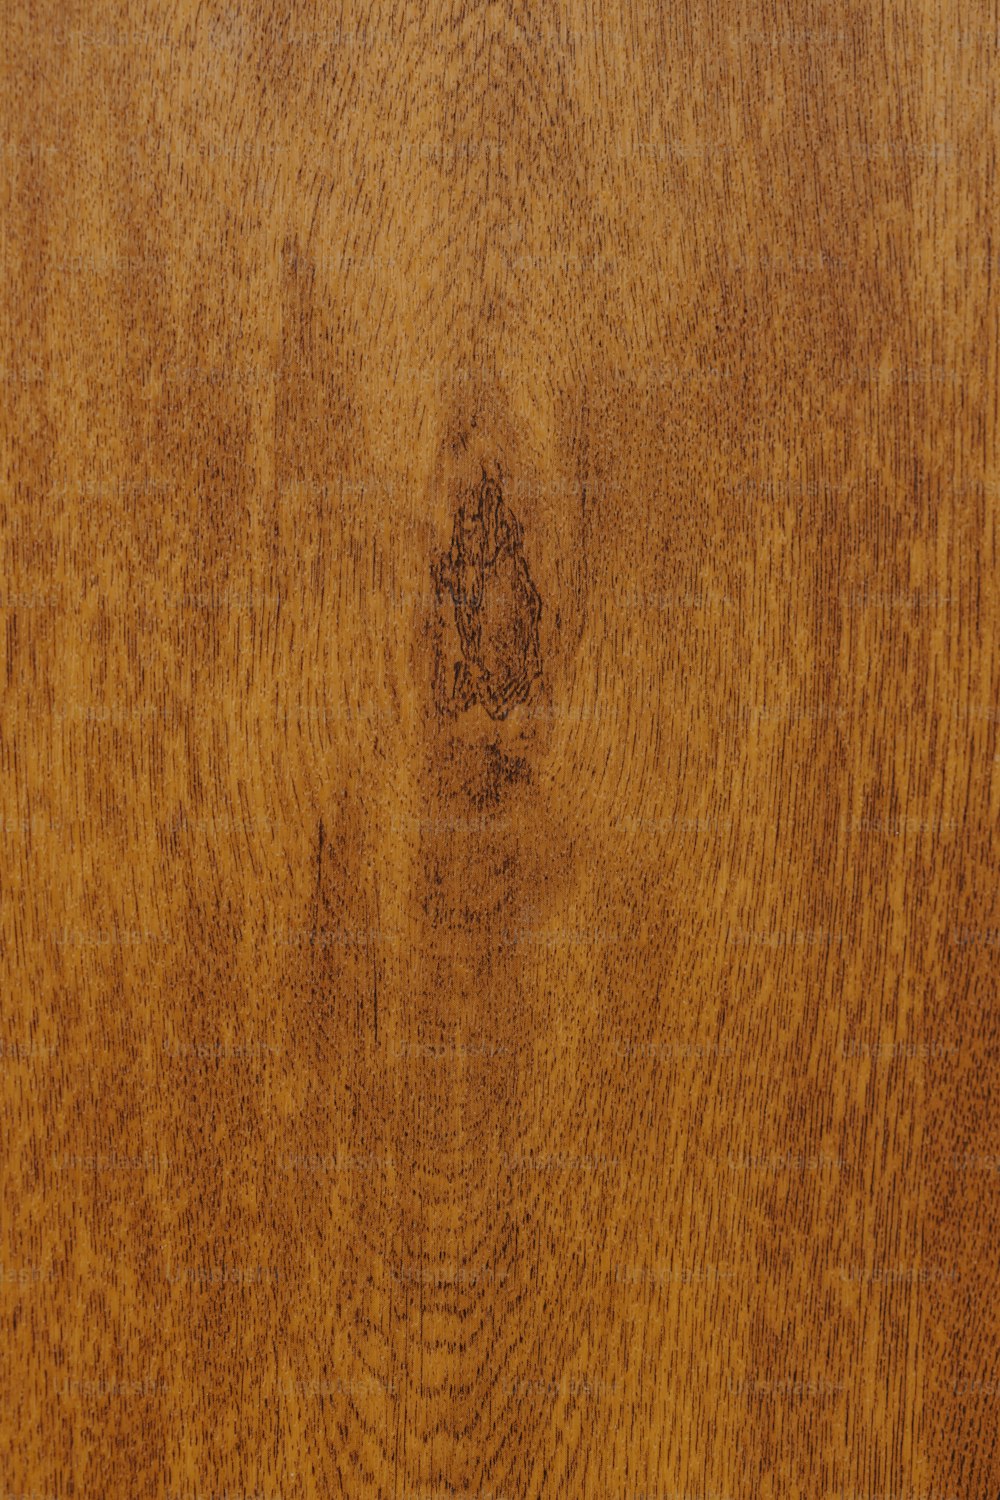 a close up of a wood grain surface